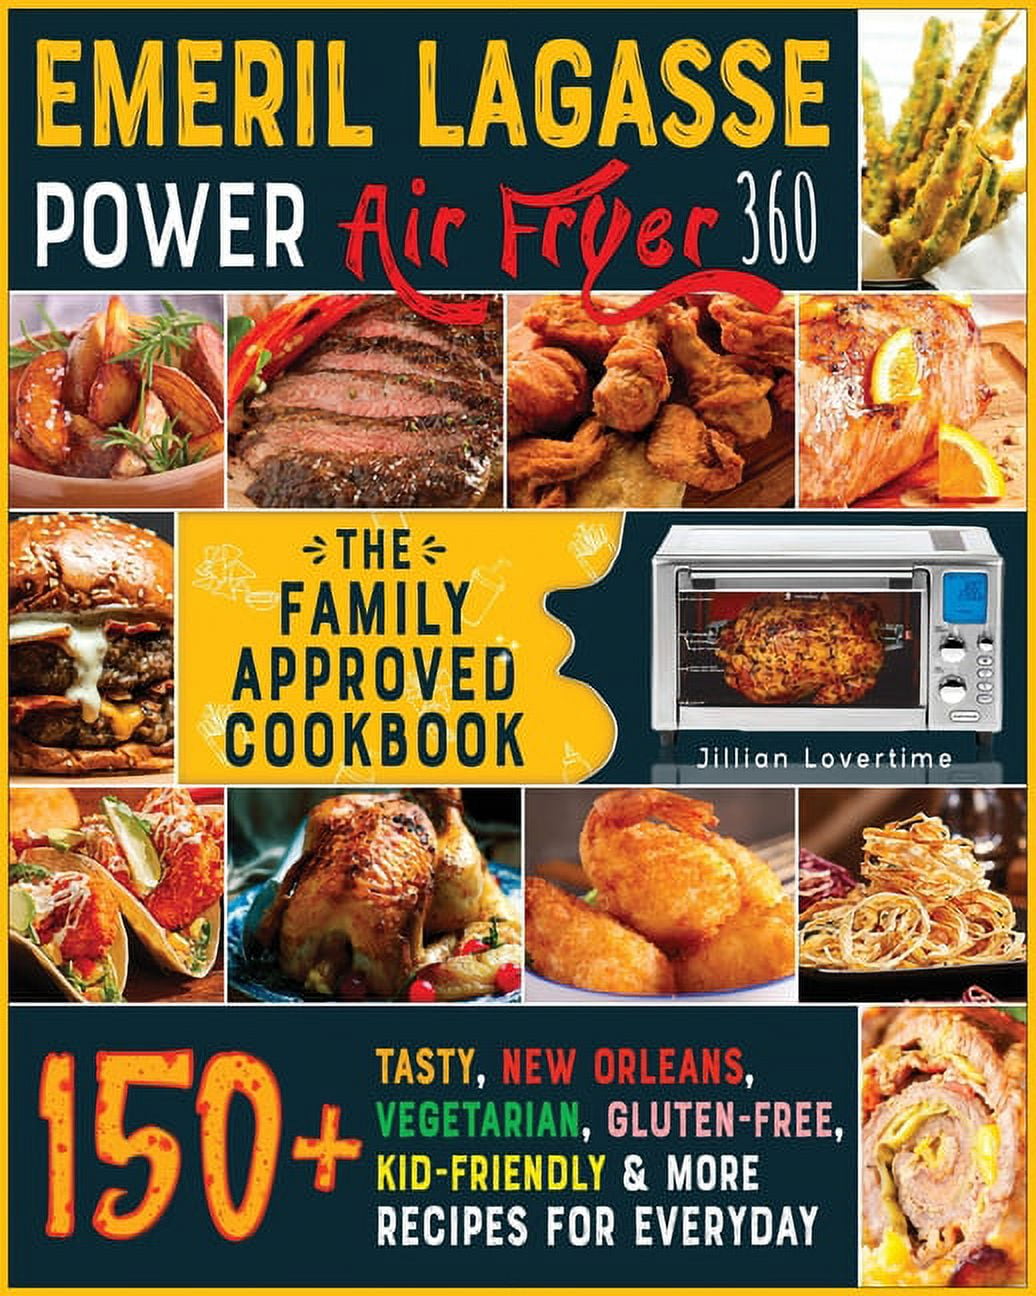 Emeril Lagasse Power Air Fryer 360 Cookbook: 800 Delicious, Healthy and  Everyday Recipes For the Power Airfryer 360 to Air Fry, Bake, Rotisserie,  Dehy (Hardcover)